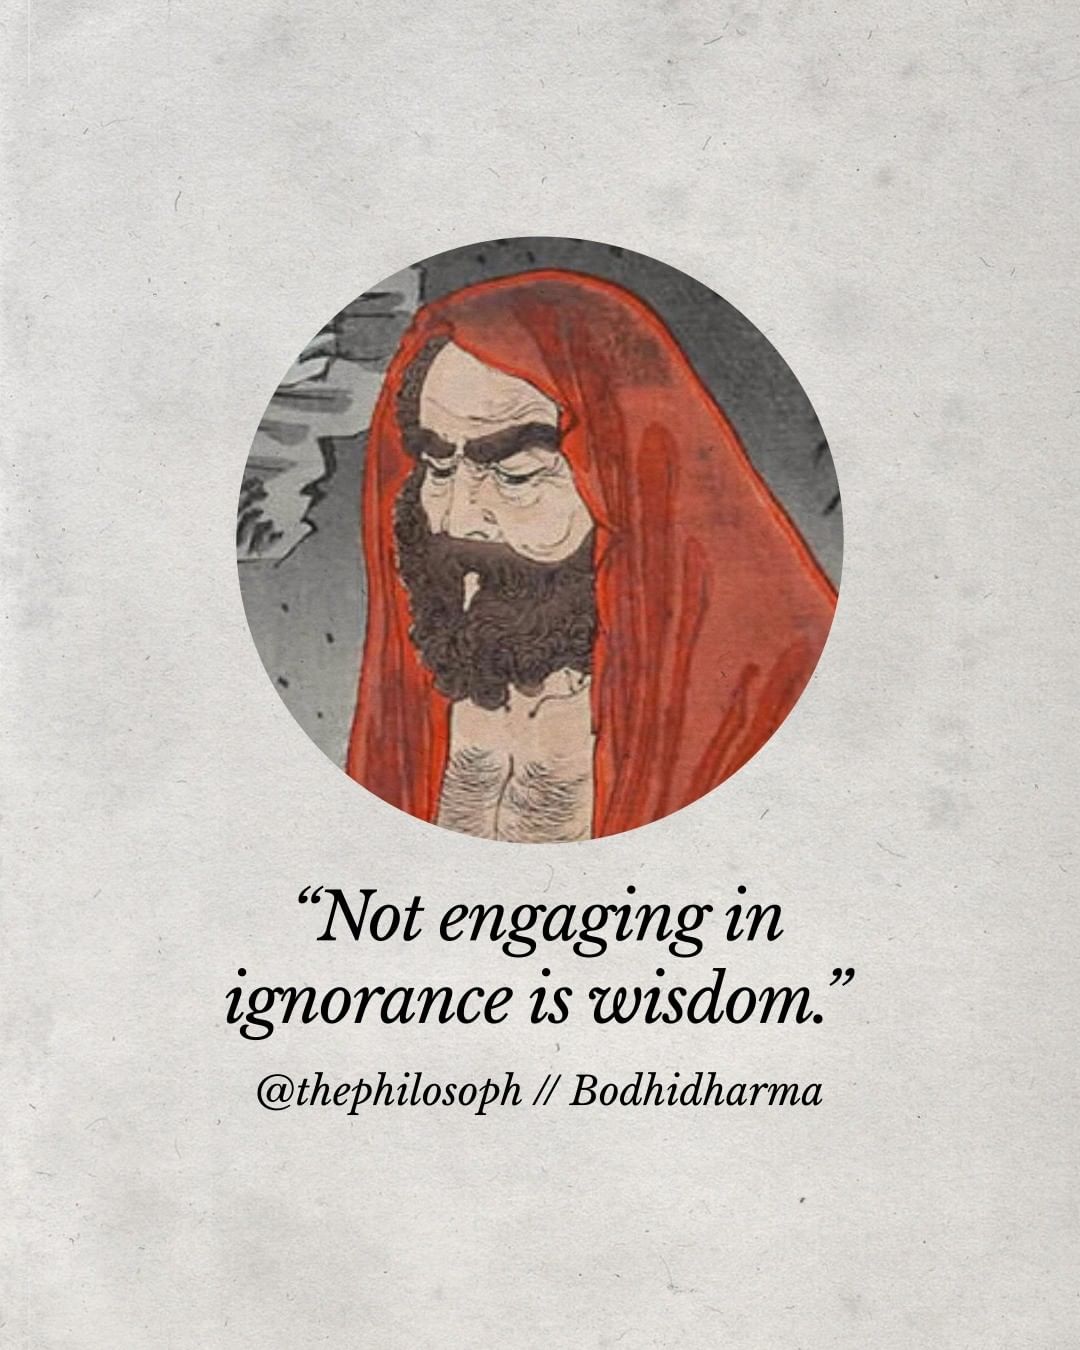 Not engaging in ignorance is wisdom